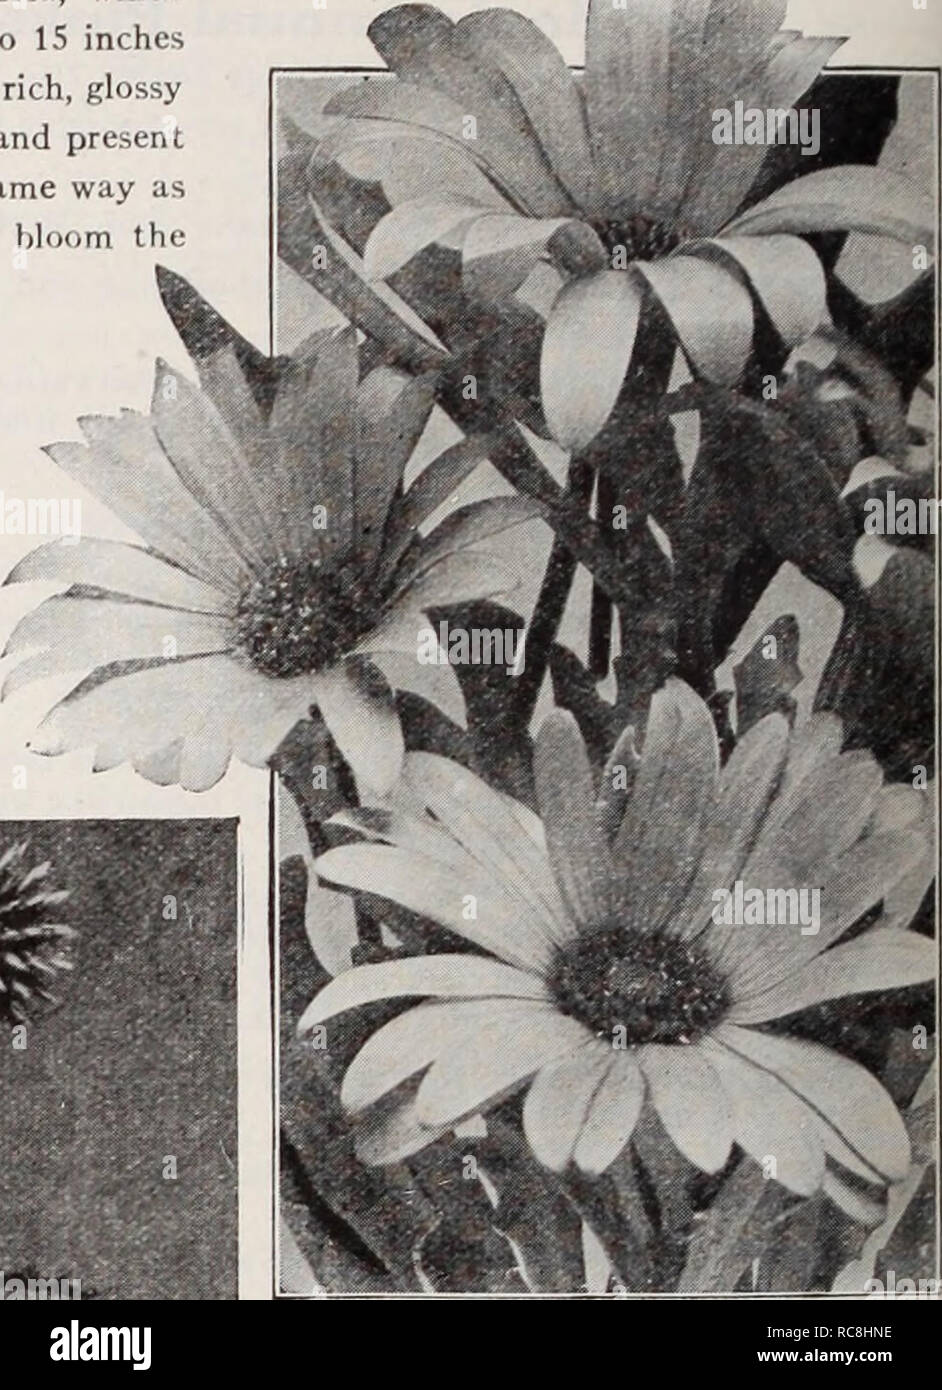 . Dreer's garden book / Henry A. Dreer.. Nursery Catalogue. PER PKT. (Wild ( Dimorphotheca (African Golden Daisy) Echi nocys t is (Wild Cucumber Vine) 2401 Lobata. One of the quickest growing annual vines we know of; splendid for covering trellises, old trees, fences, etc. Clean, bright green foliage and sprays of white flowers in July and August. (See cut.) Per oz., 30 cts $0 10 EchillOpS (Globe Thistle) 2404 Ritro. Striking hardy per- ennial plants, with hand- some silvery thistle-like foli- age and fine steel-blue flowers in round heads, which can be used for cutting; 3 to 5 feet. Special p Stock Photo